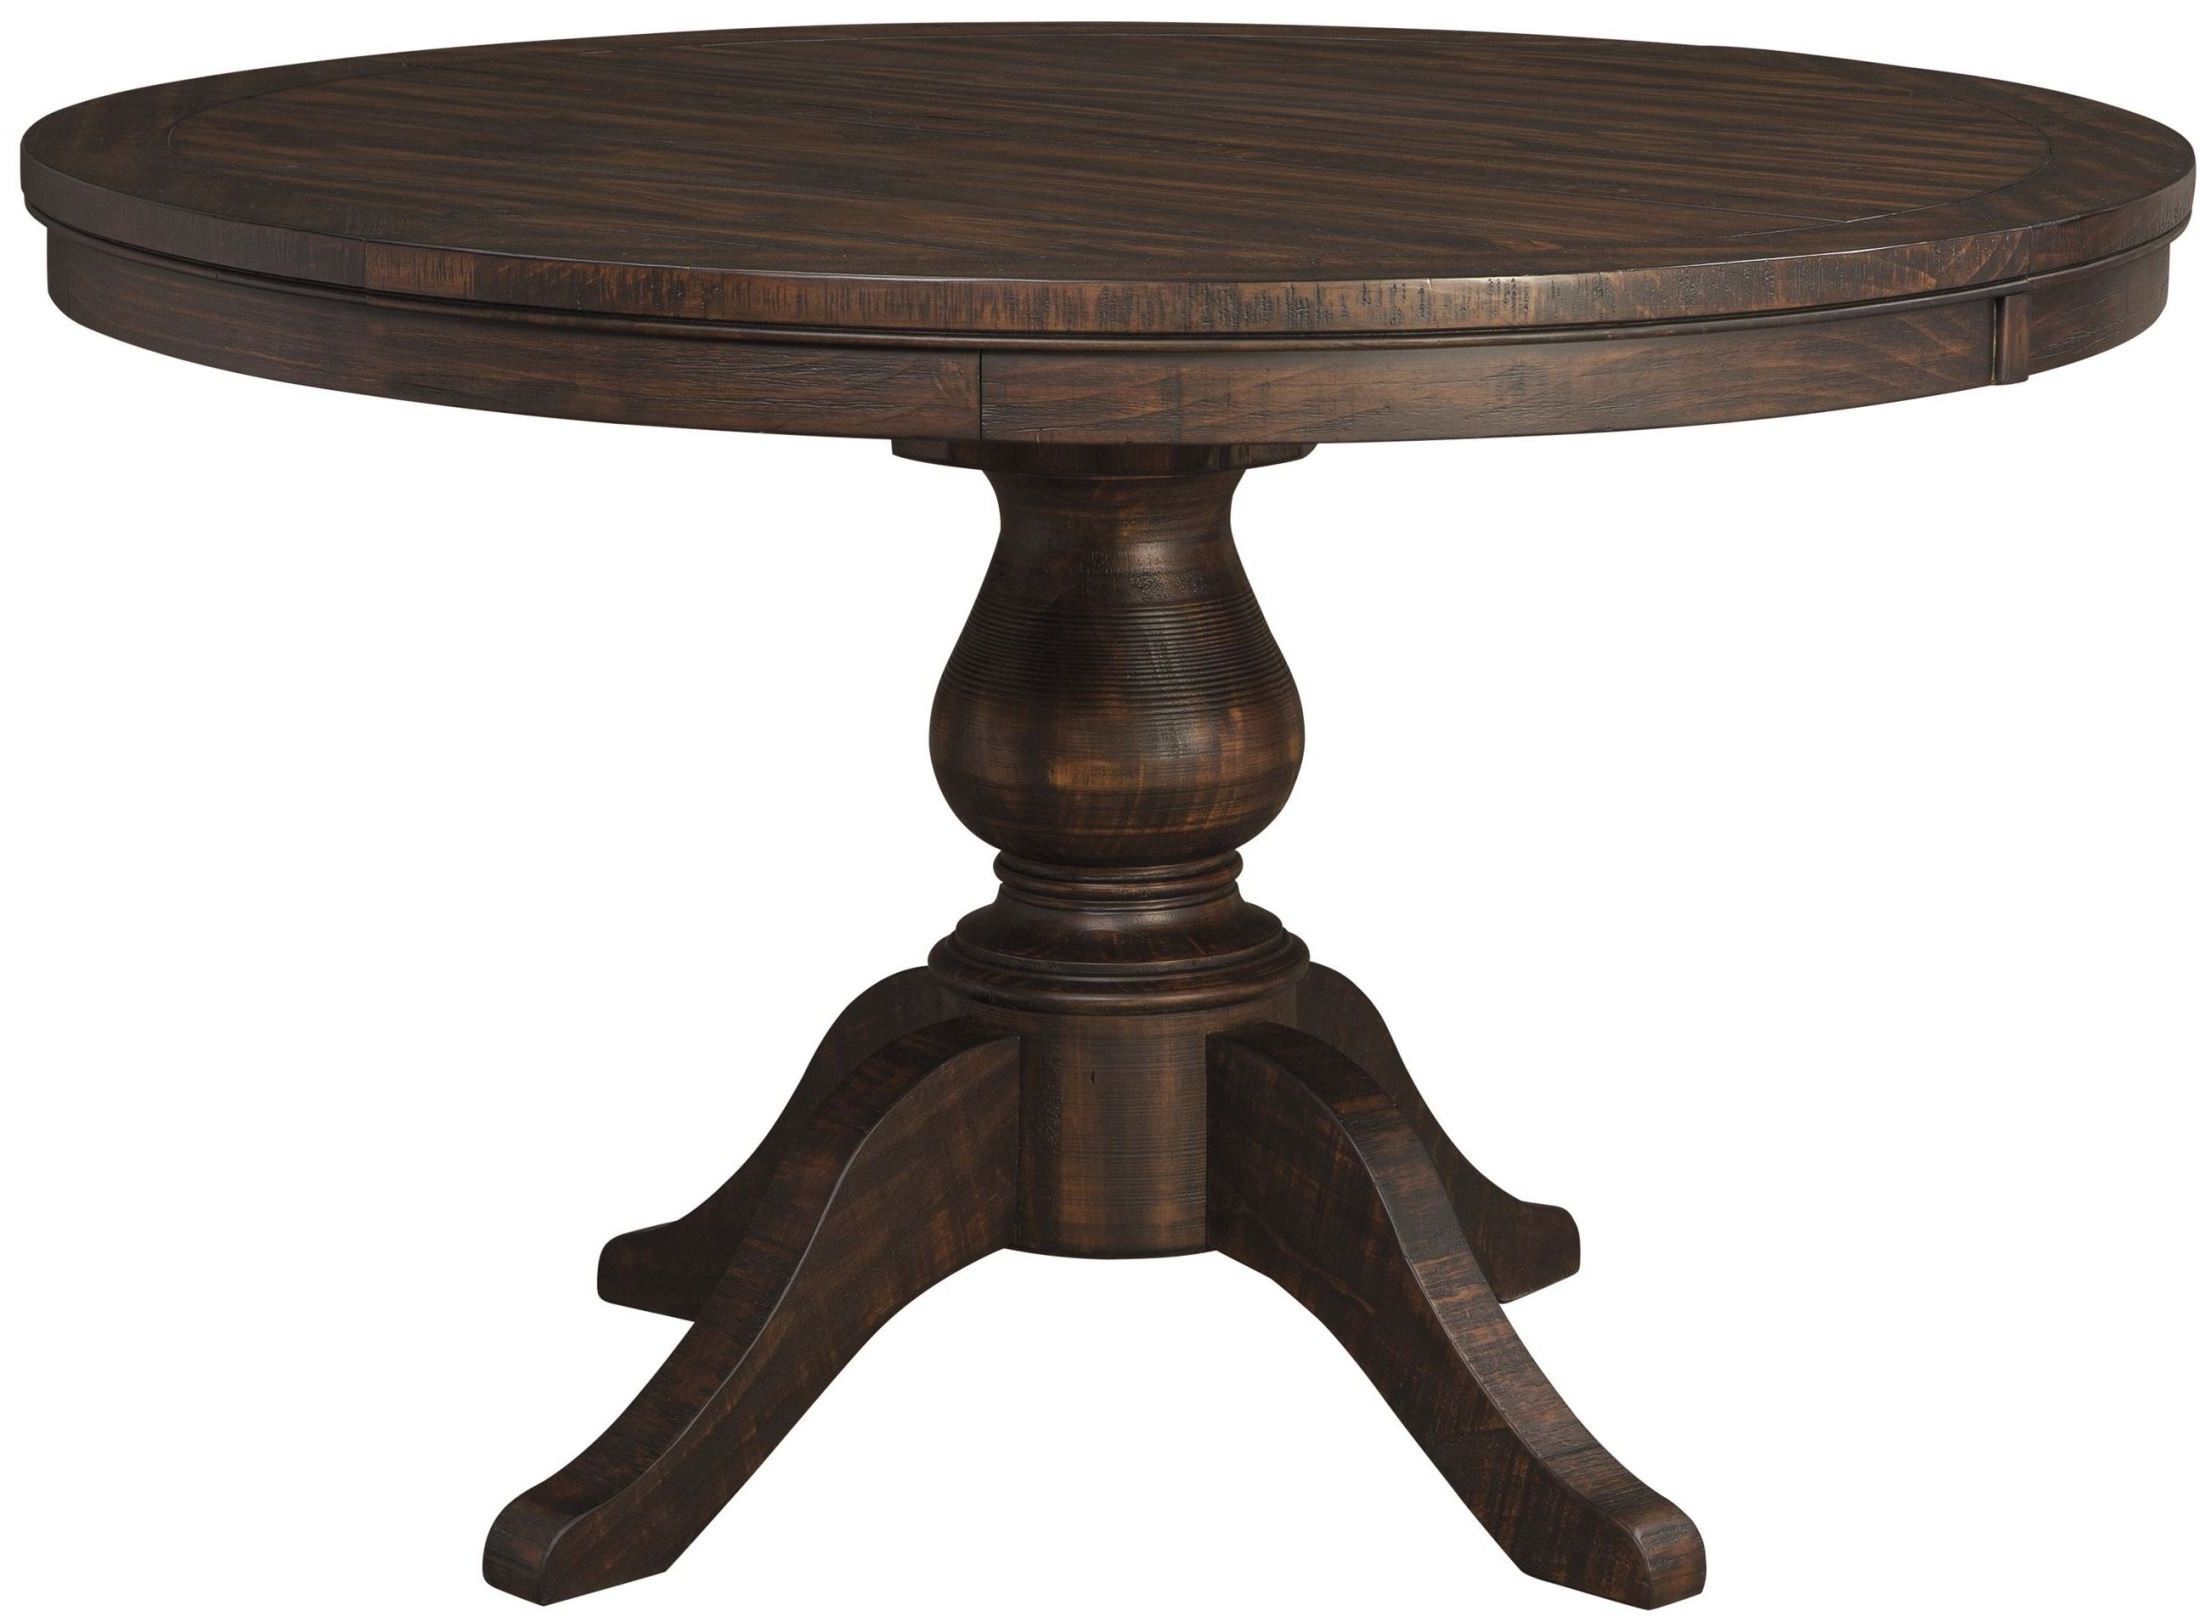 Fashionable Sevinc Pedestal Dining Tables For Trudell Dark Brown Round Extendable Pedestal Dining Table (View 1 of 20)